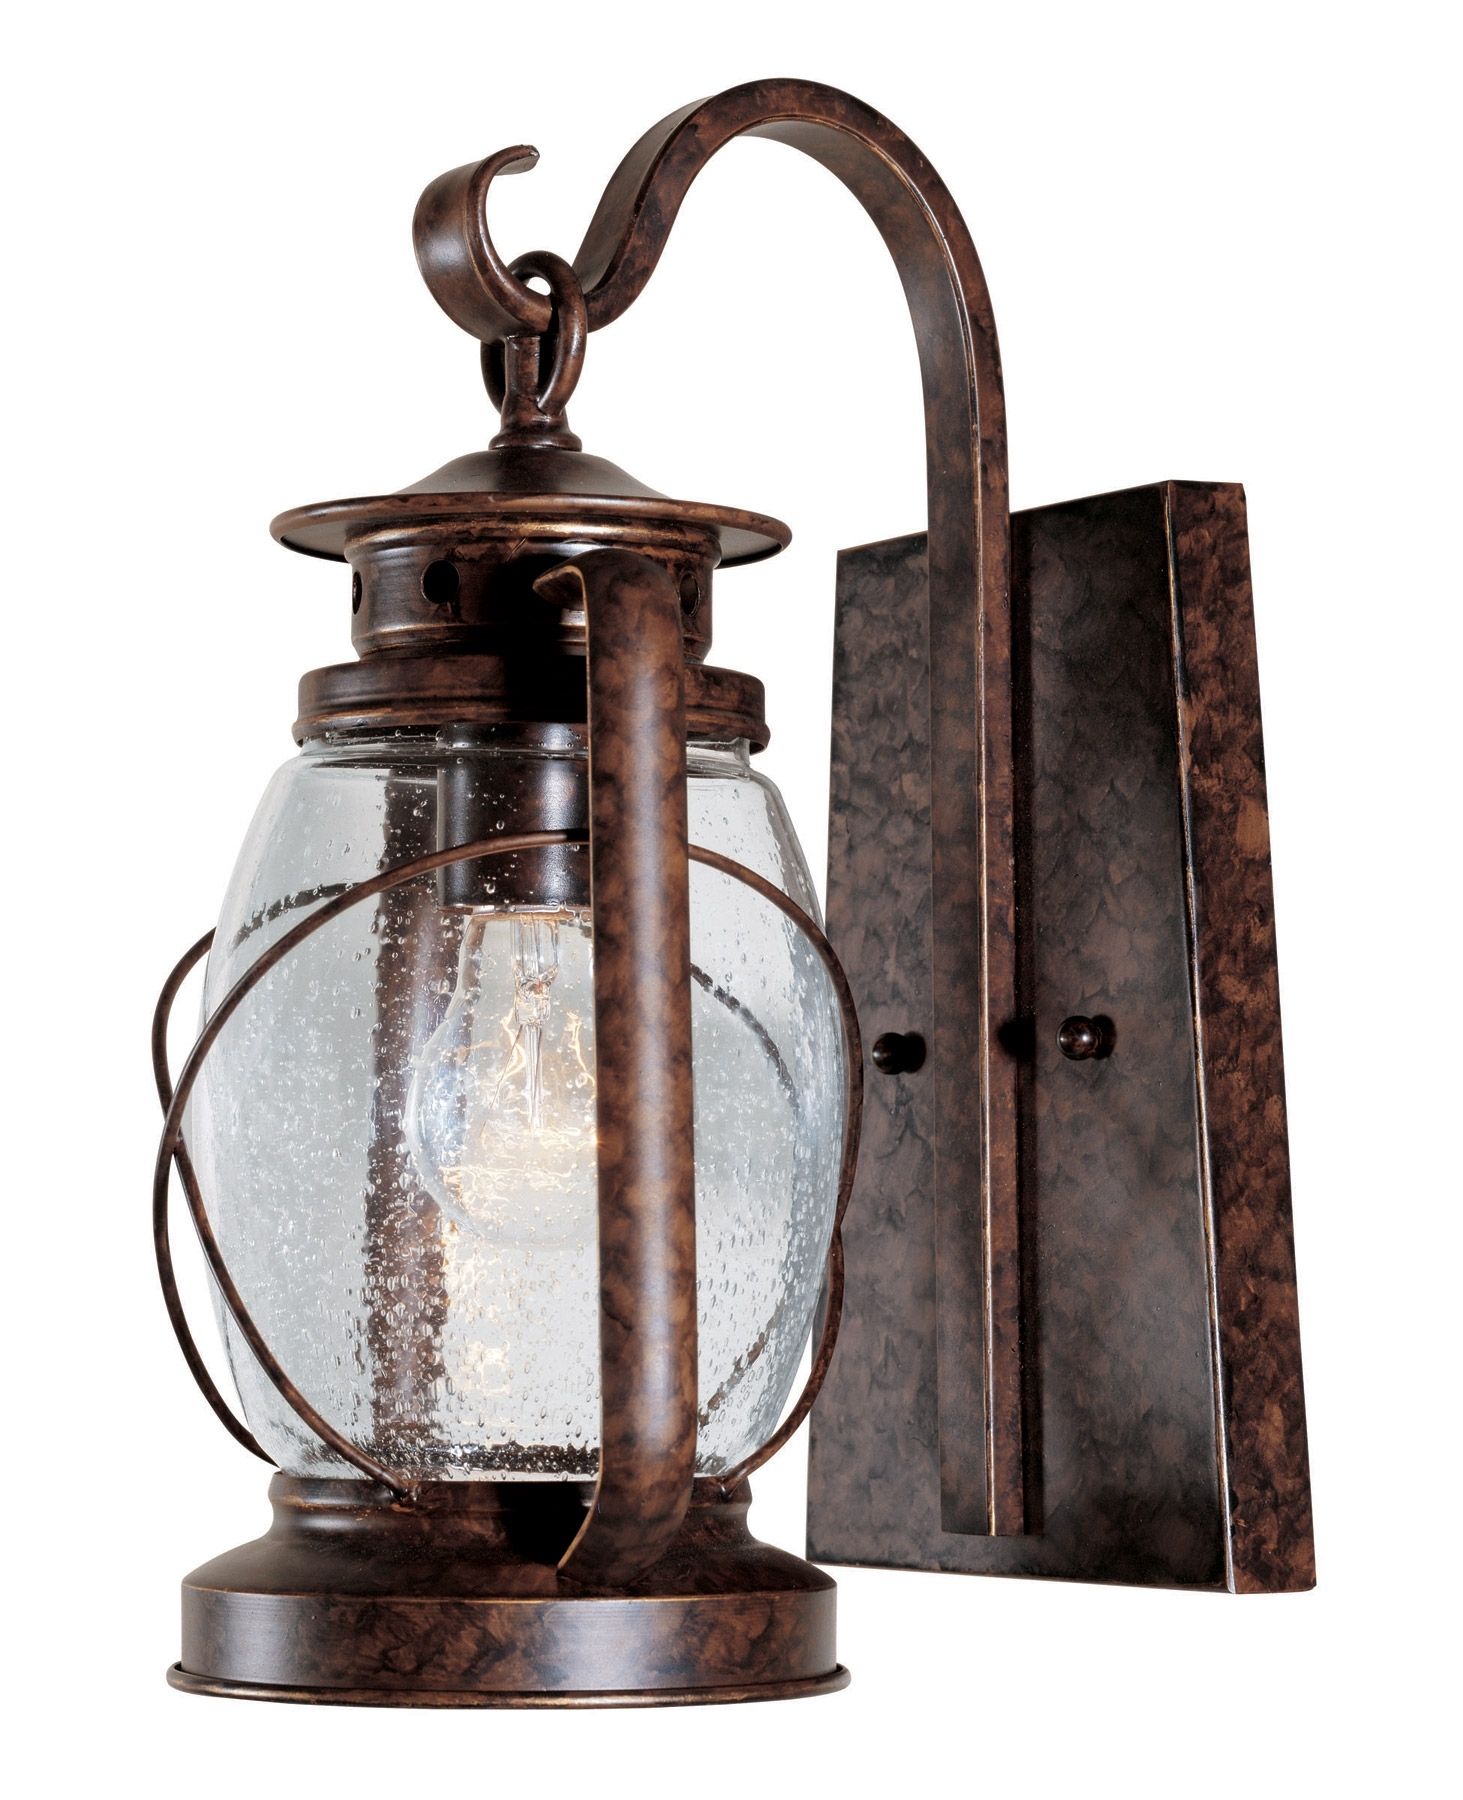 Fixtures Light : Tropical Commercial Exterior Wall Light Fixtures With Regard To Outdoor Tropical Lanterns (View 14 of 20)